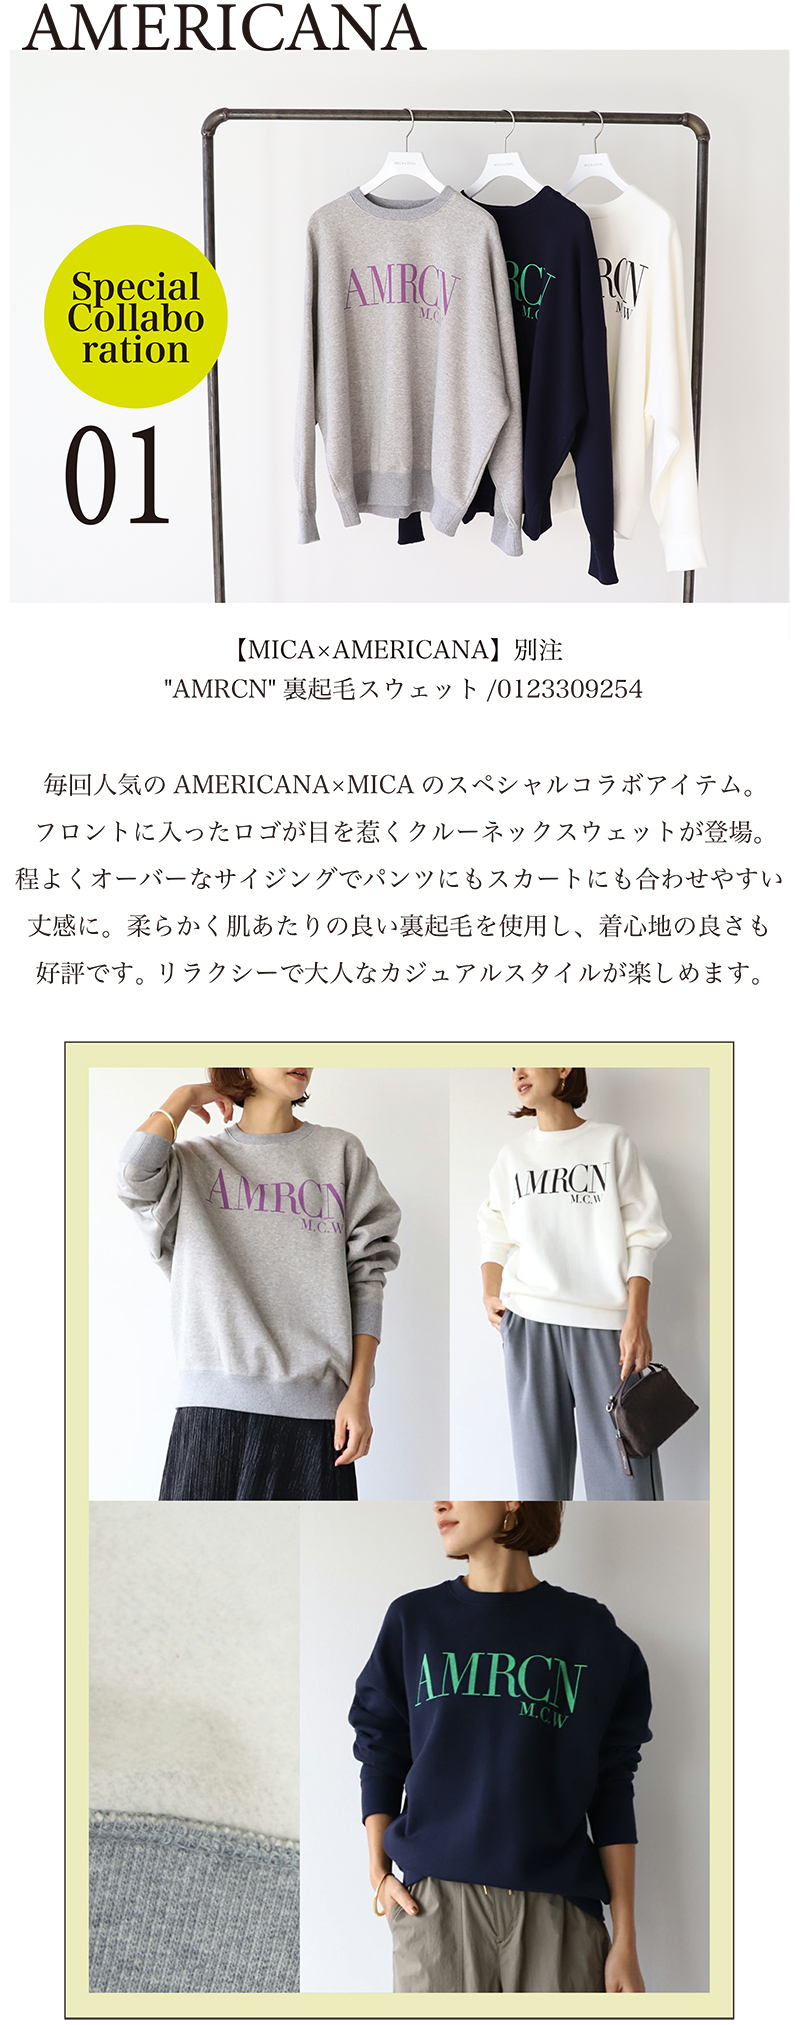 AMERICANA】新作が登場☆ | MICA&DEAL ONLINE STORE